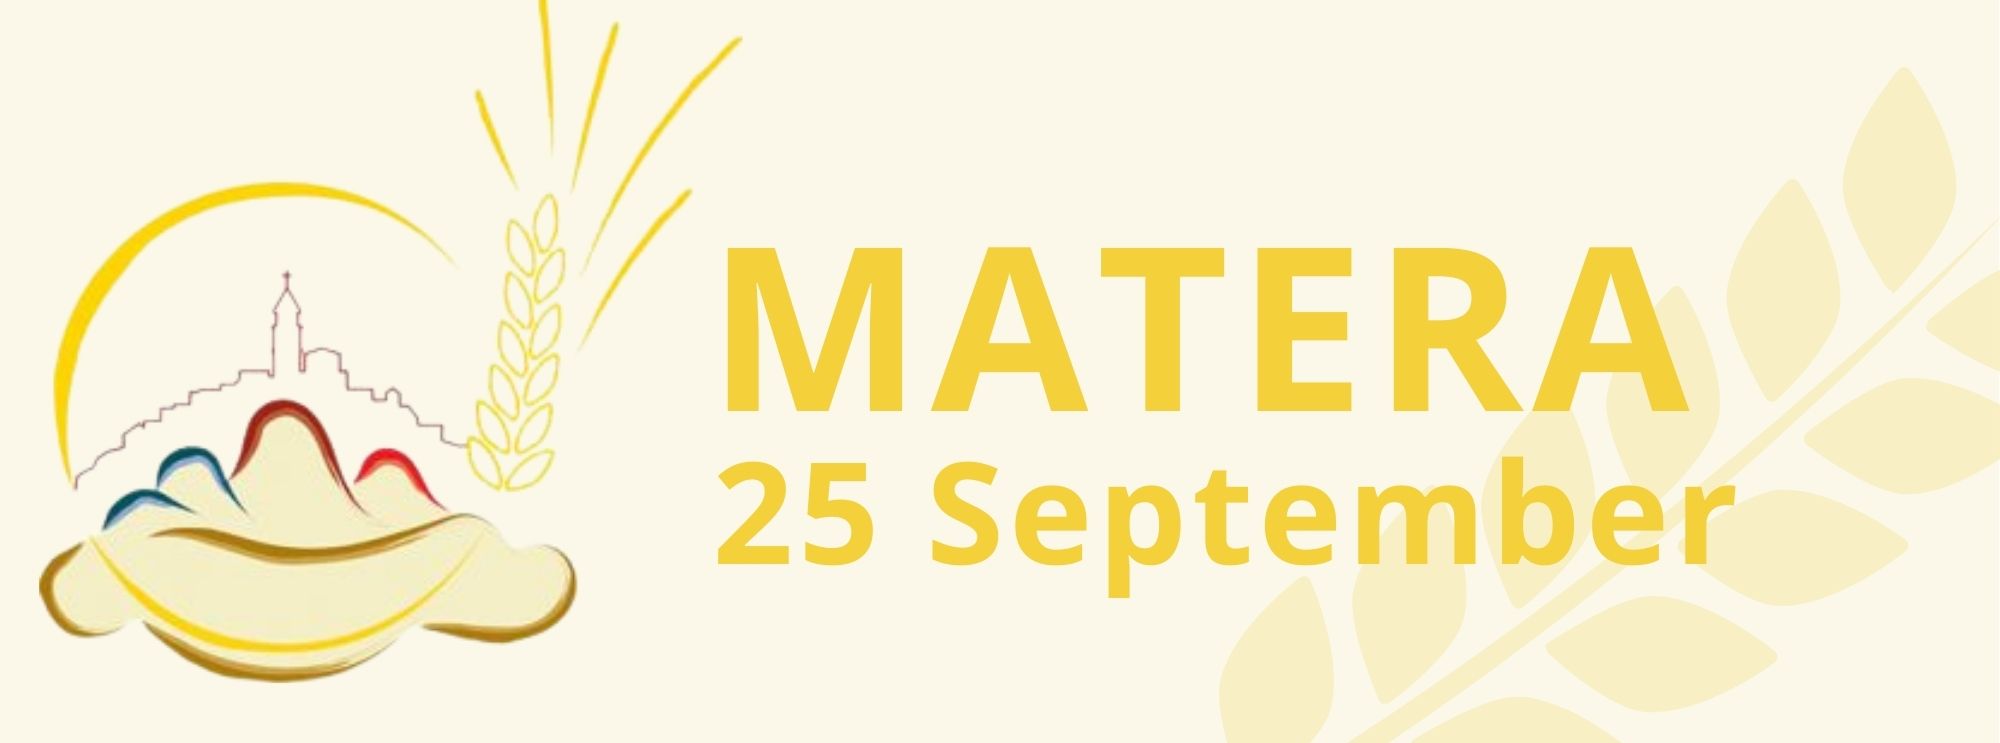 Pastoral Visit of the Holy Father to Matera for the conclusion of the 27th National Eucharistic Congress, 25 September 2022